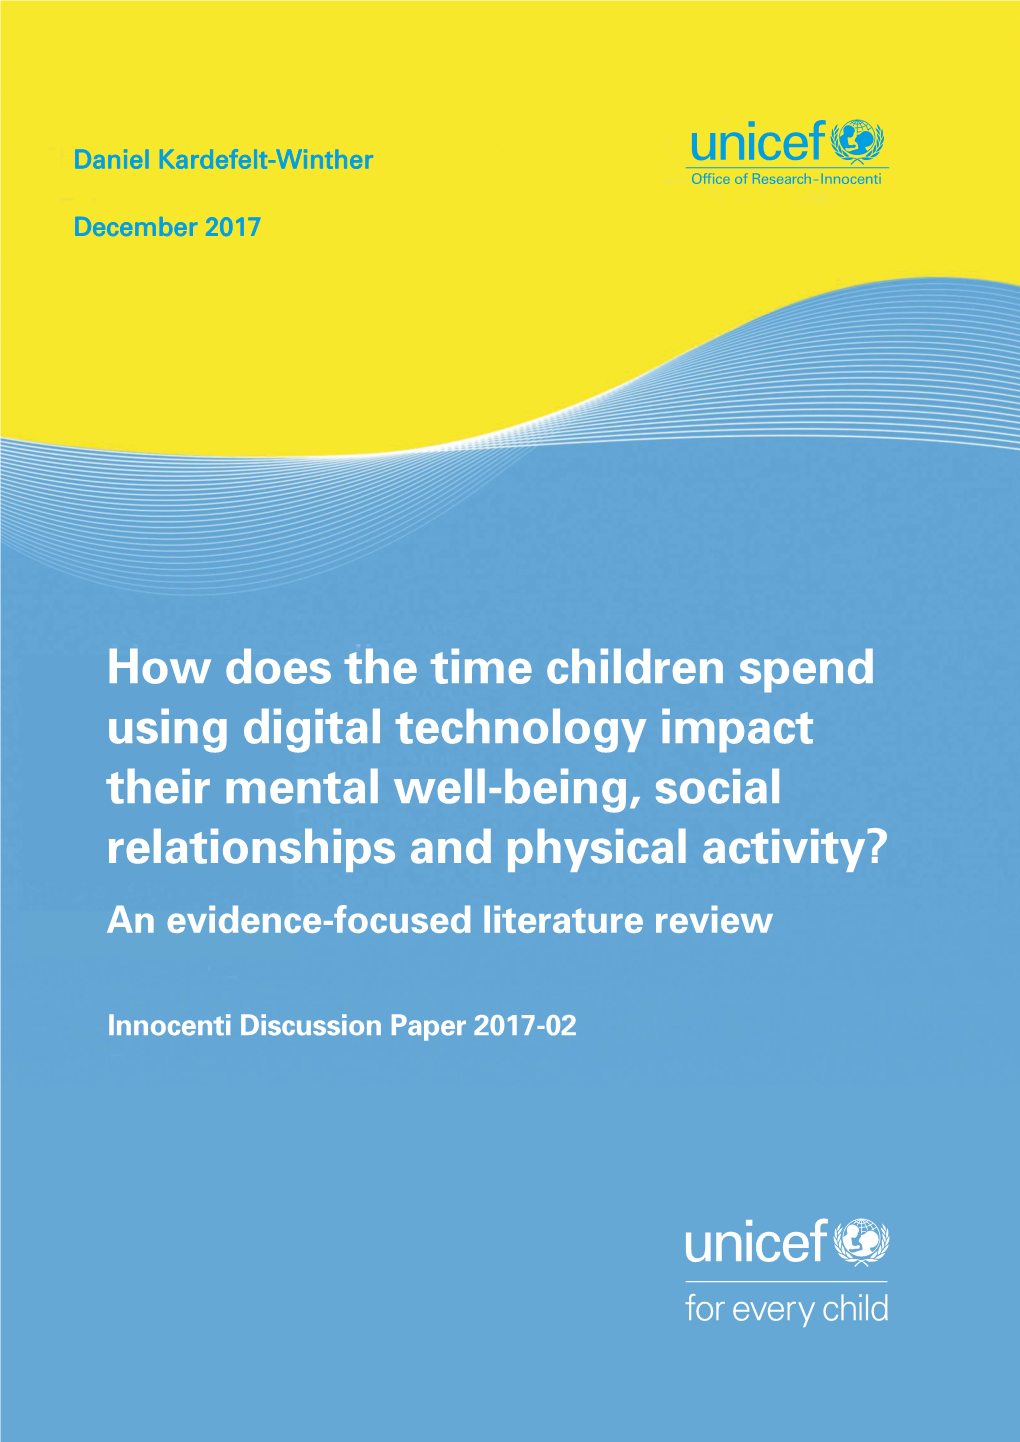 Does the Time Children Spend Using Digital Technology Impact Their Mental